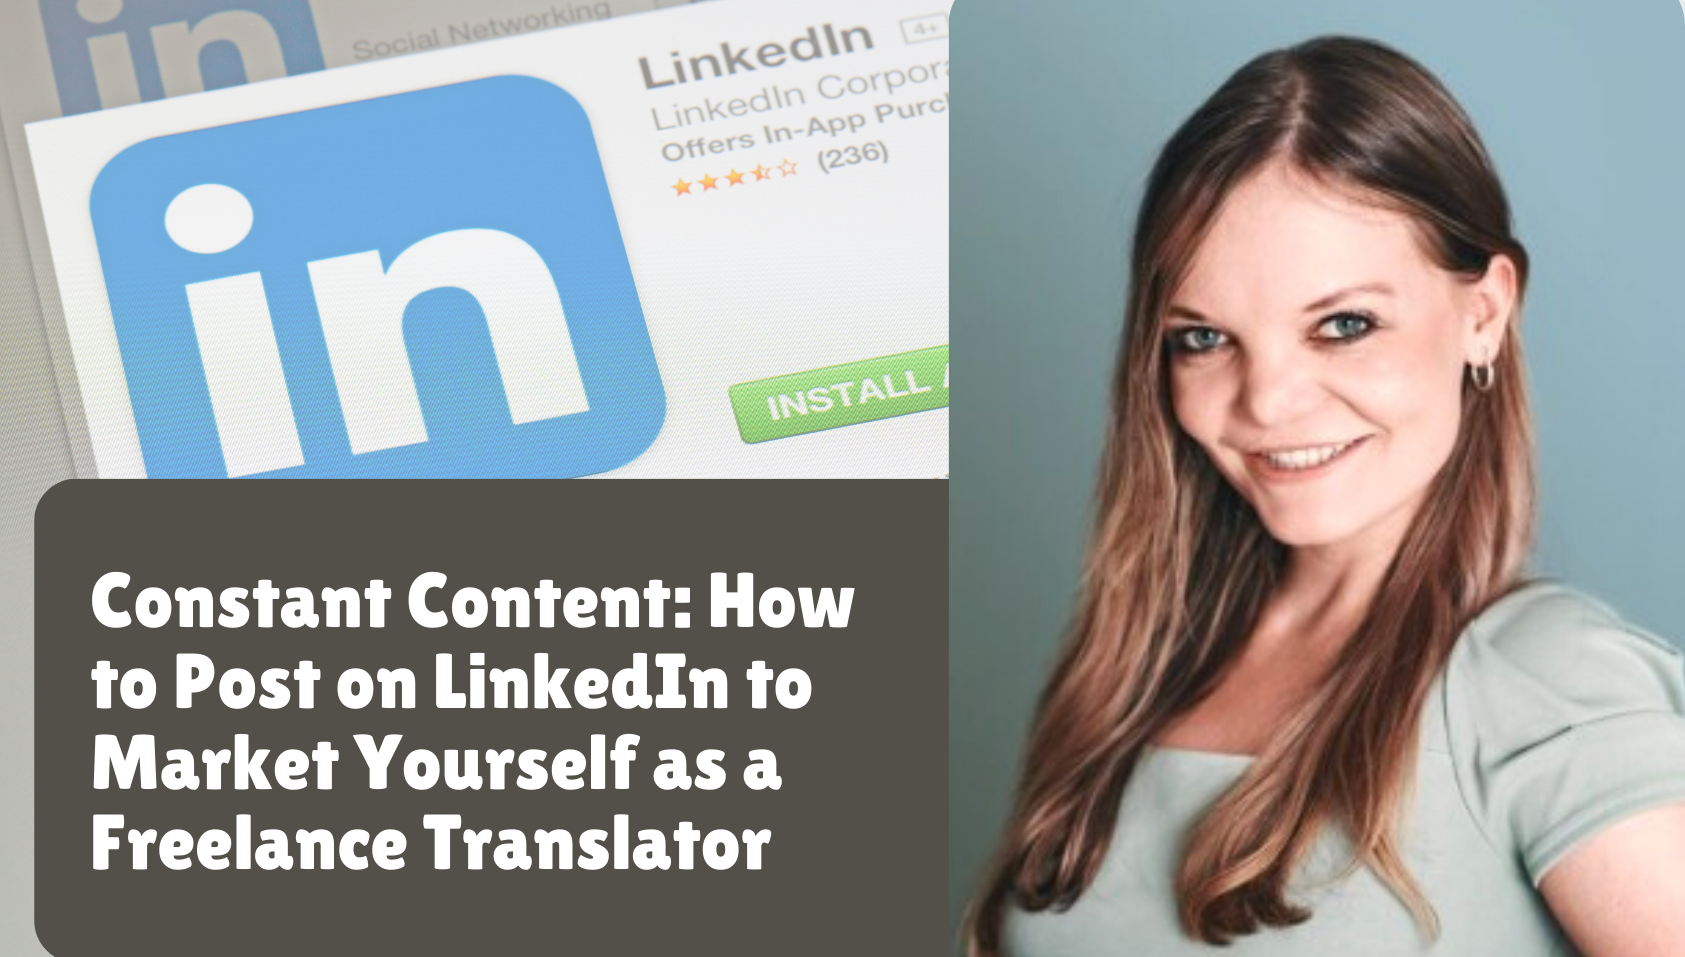 How to Post on LinkedIn to Market Yourself as a Freelance Translator